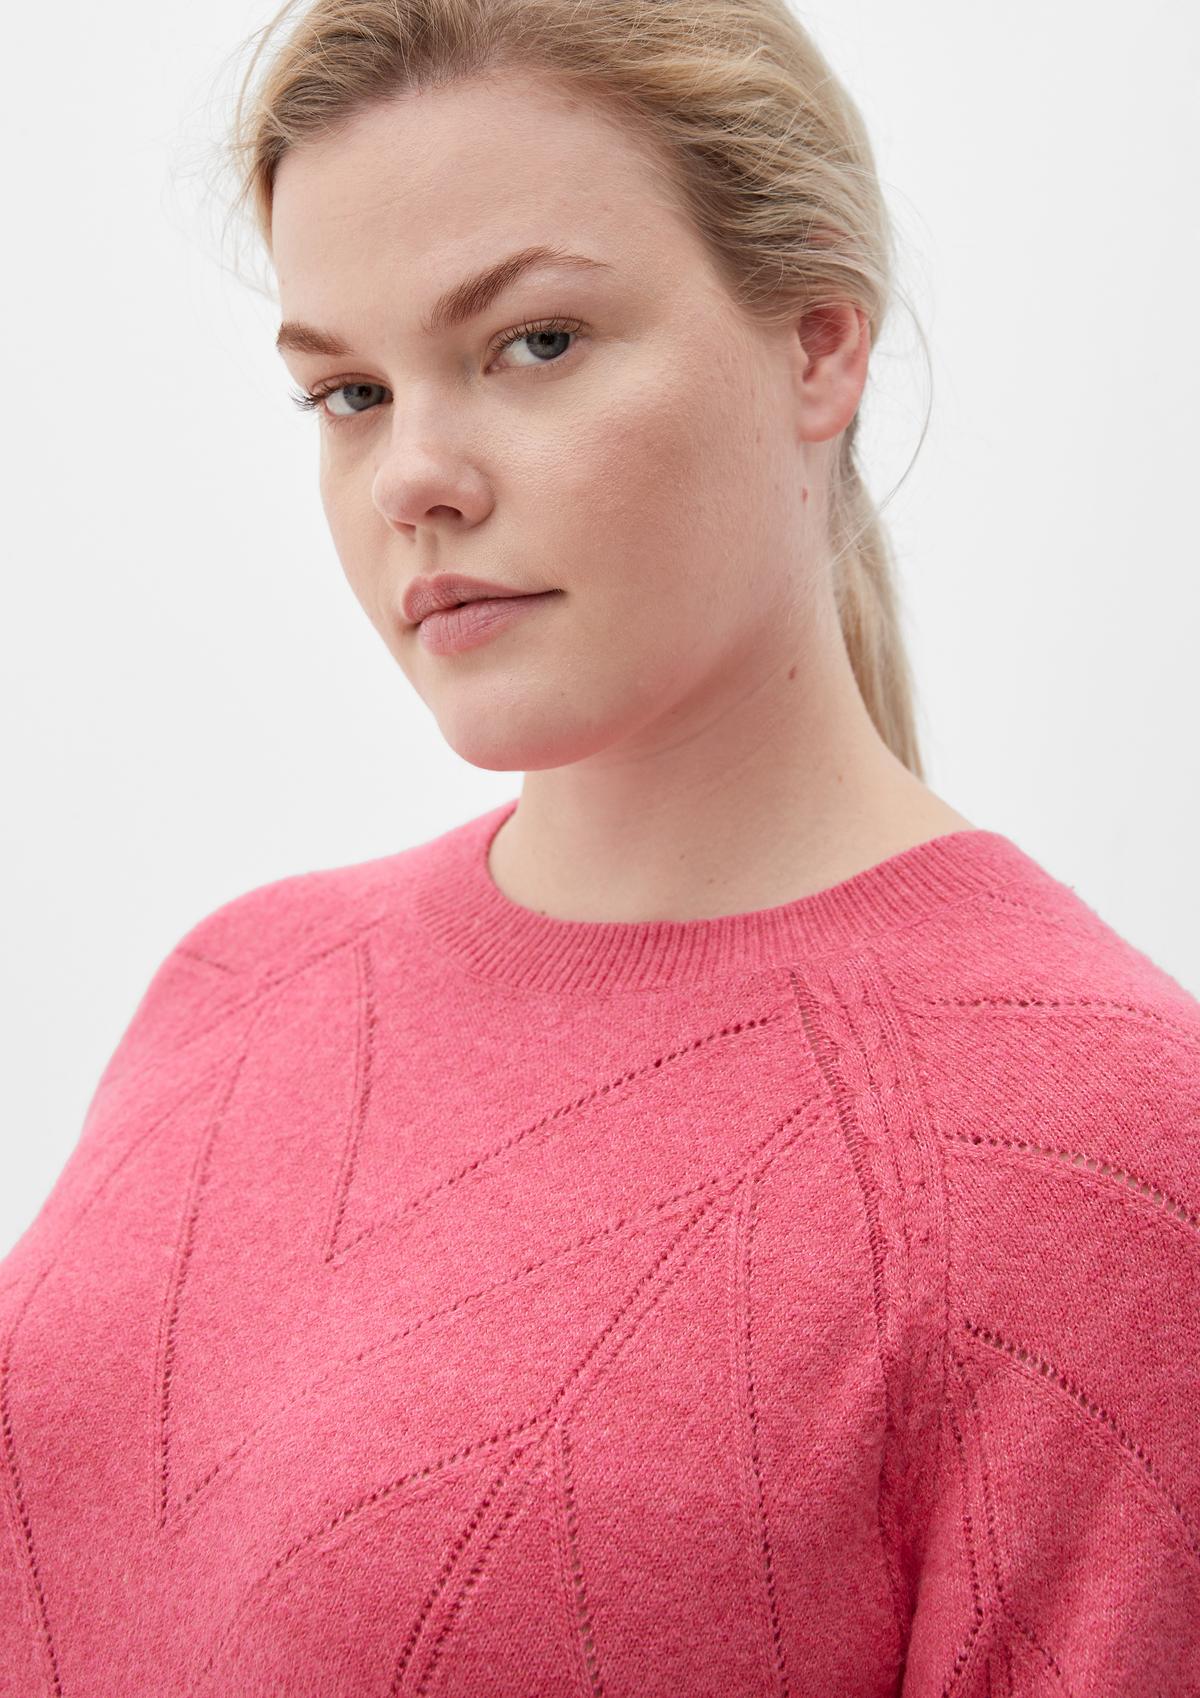 s.Oliver Knitted jumper with an open-work pattern